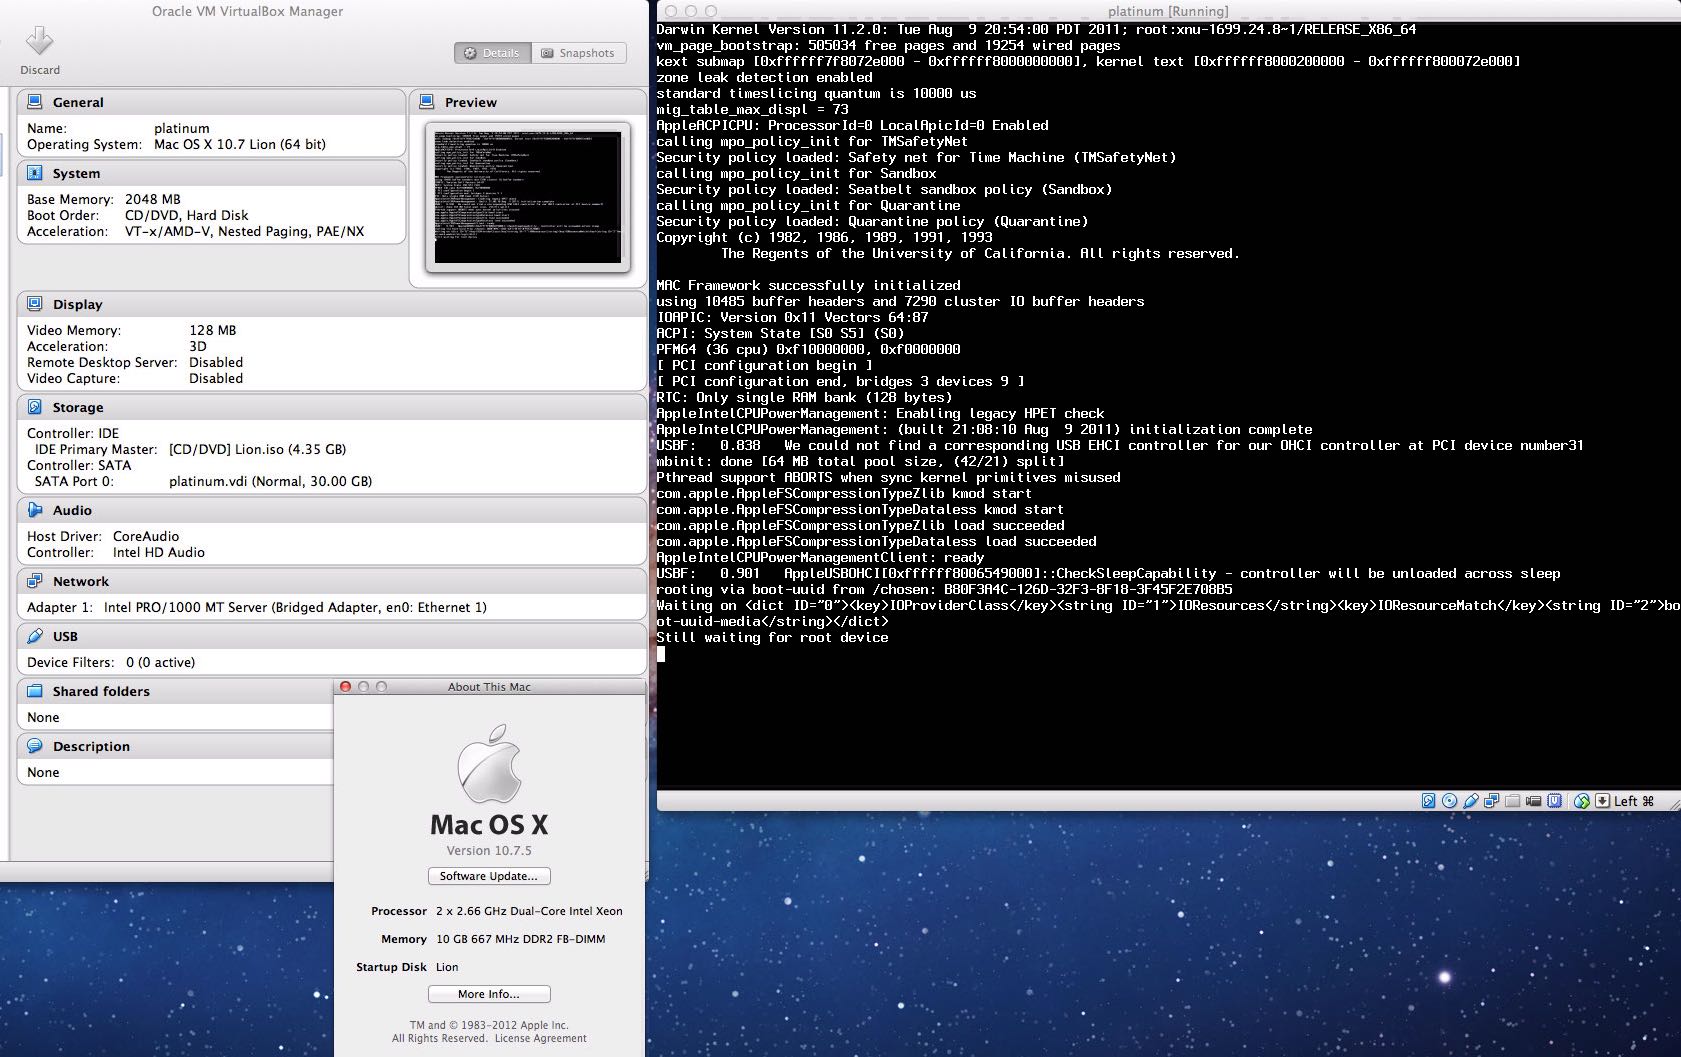 mac still waiting for root device vmware